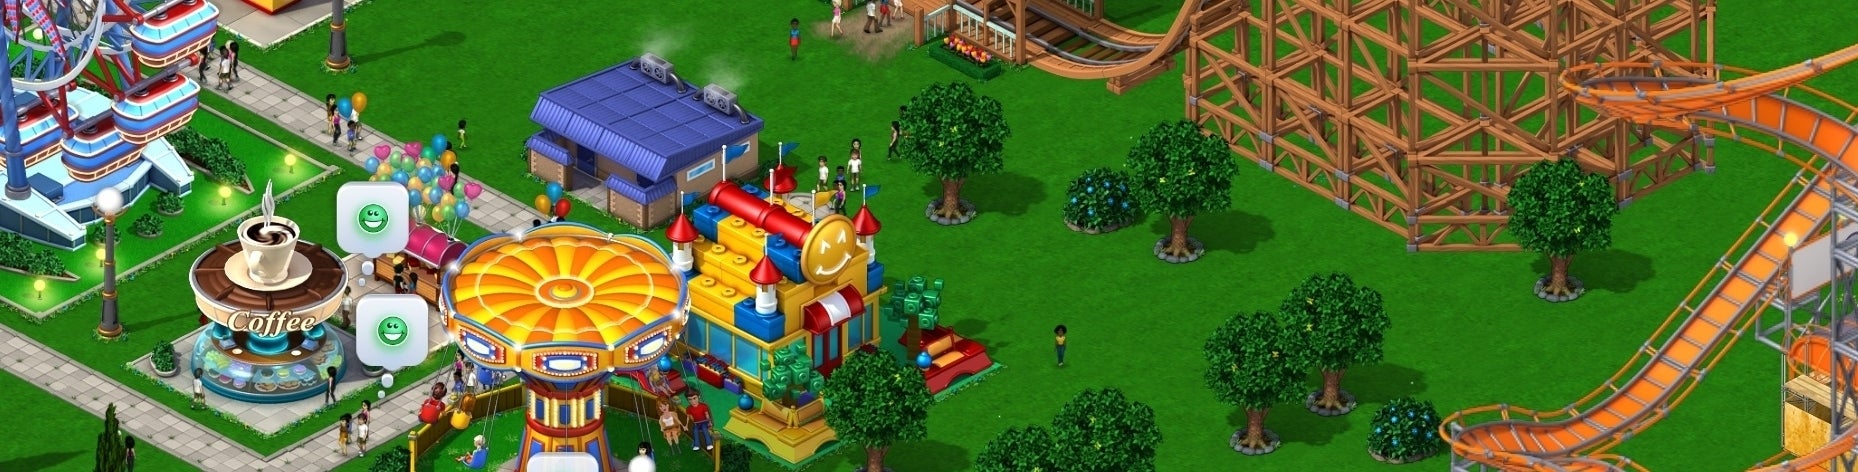 Image for Rollercoaster Tycoon 4 Mobile review